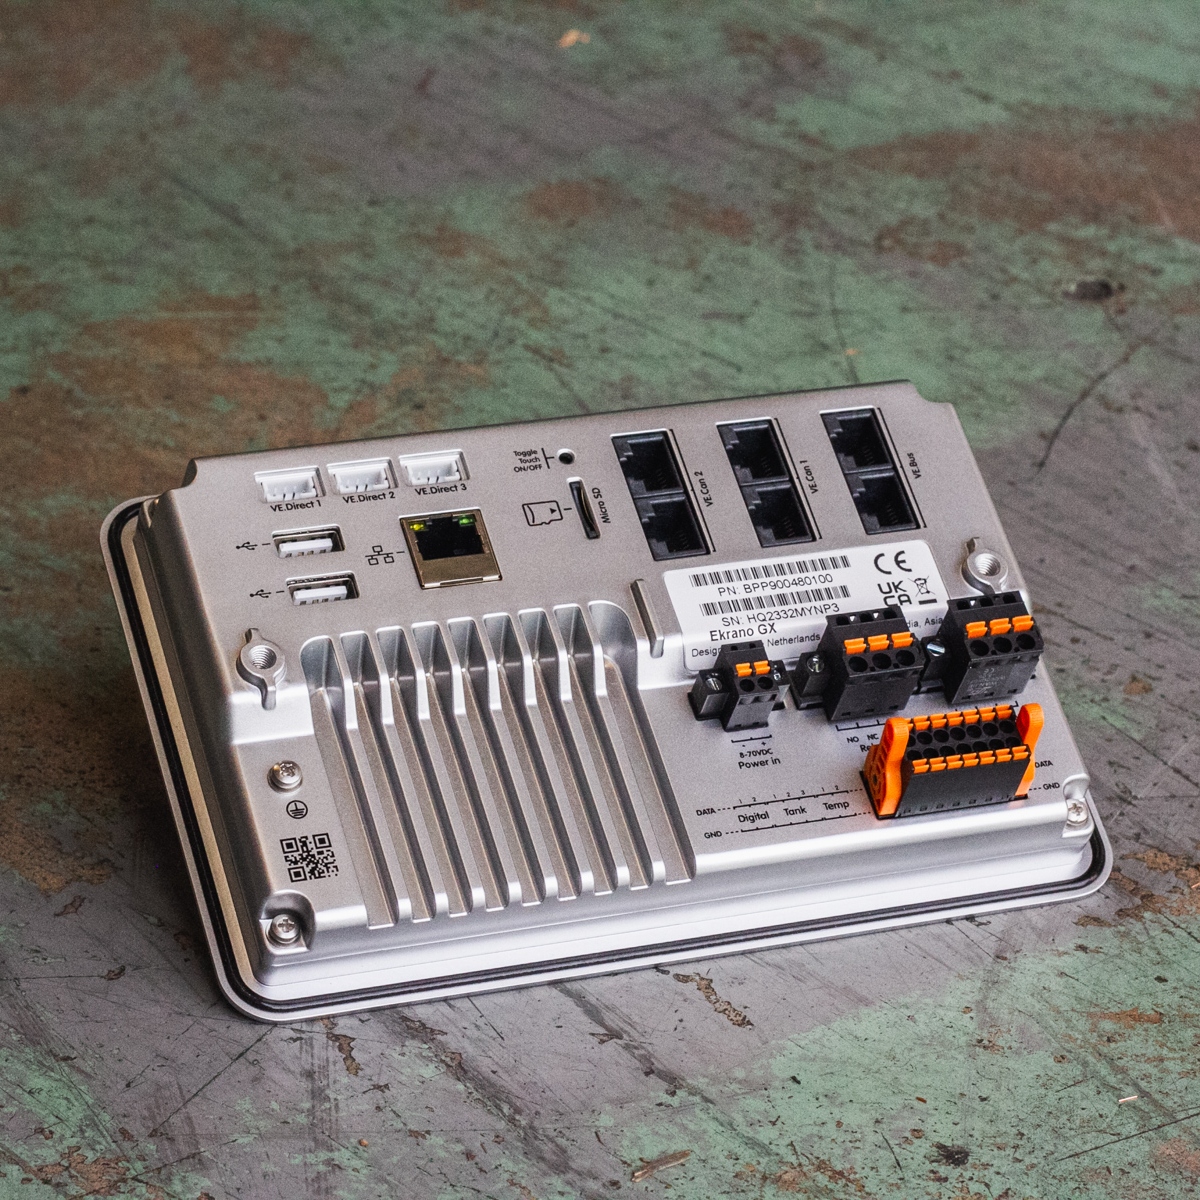 A sleek metal electronic device, the Victron Ekrano GX Monitoring System, equipped with multiple ports including USB, Ethernet, and connectors, elegantly positioned on a worn surface.